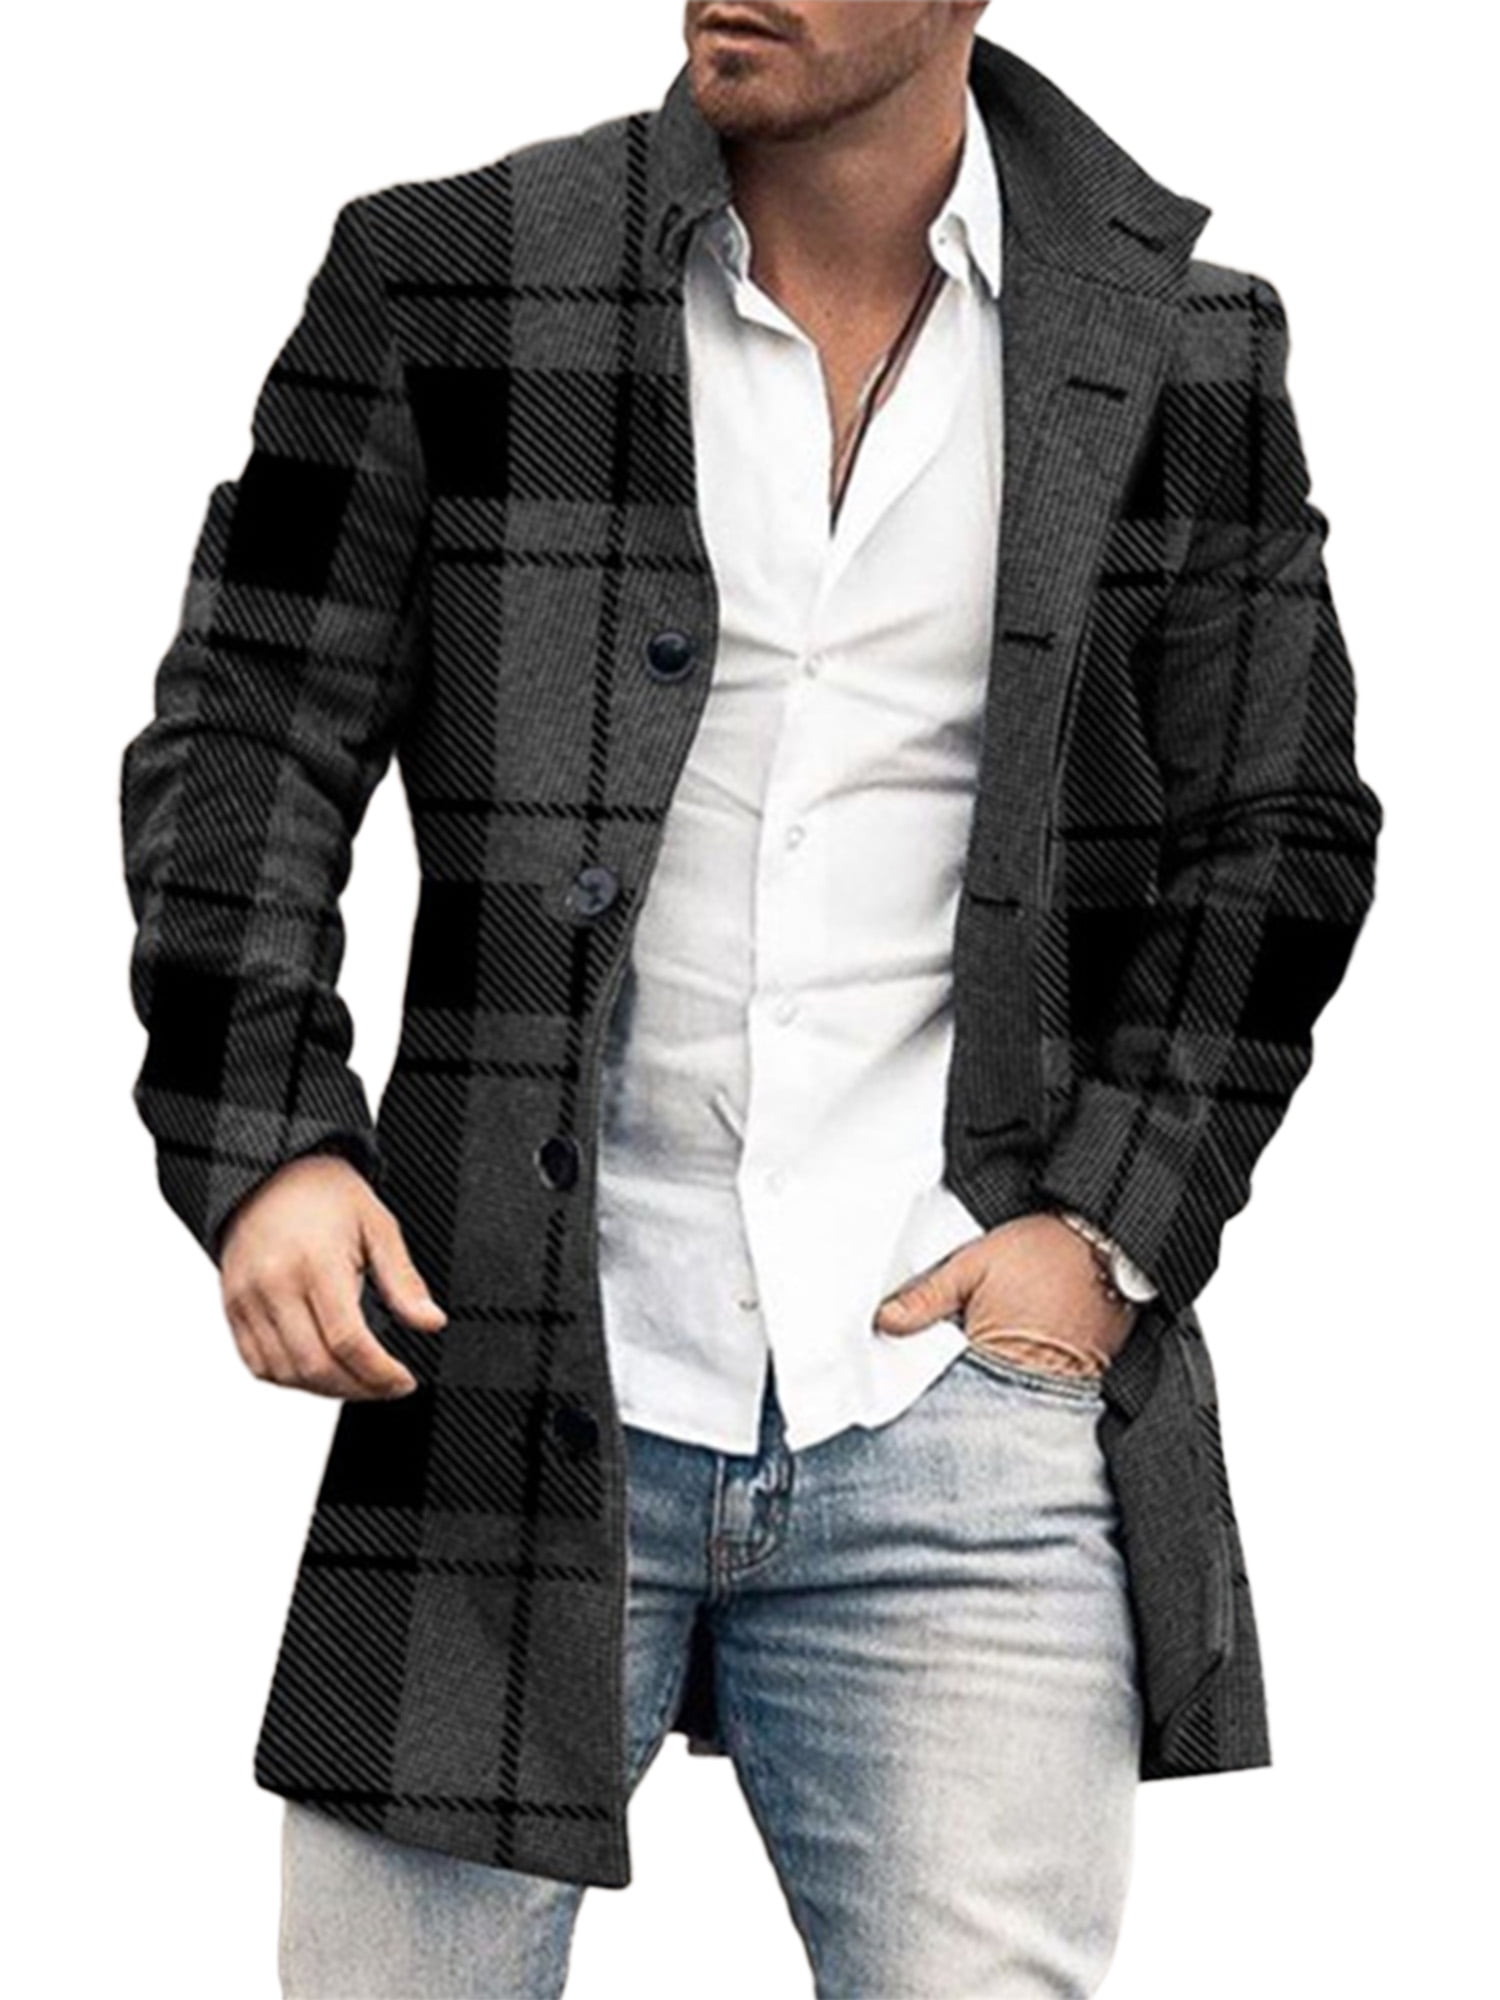 Tanming Mens Casual Slim Fit Notched Lapel Collar Plaid Mid Long Jackets Trench Coats